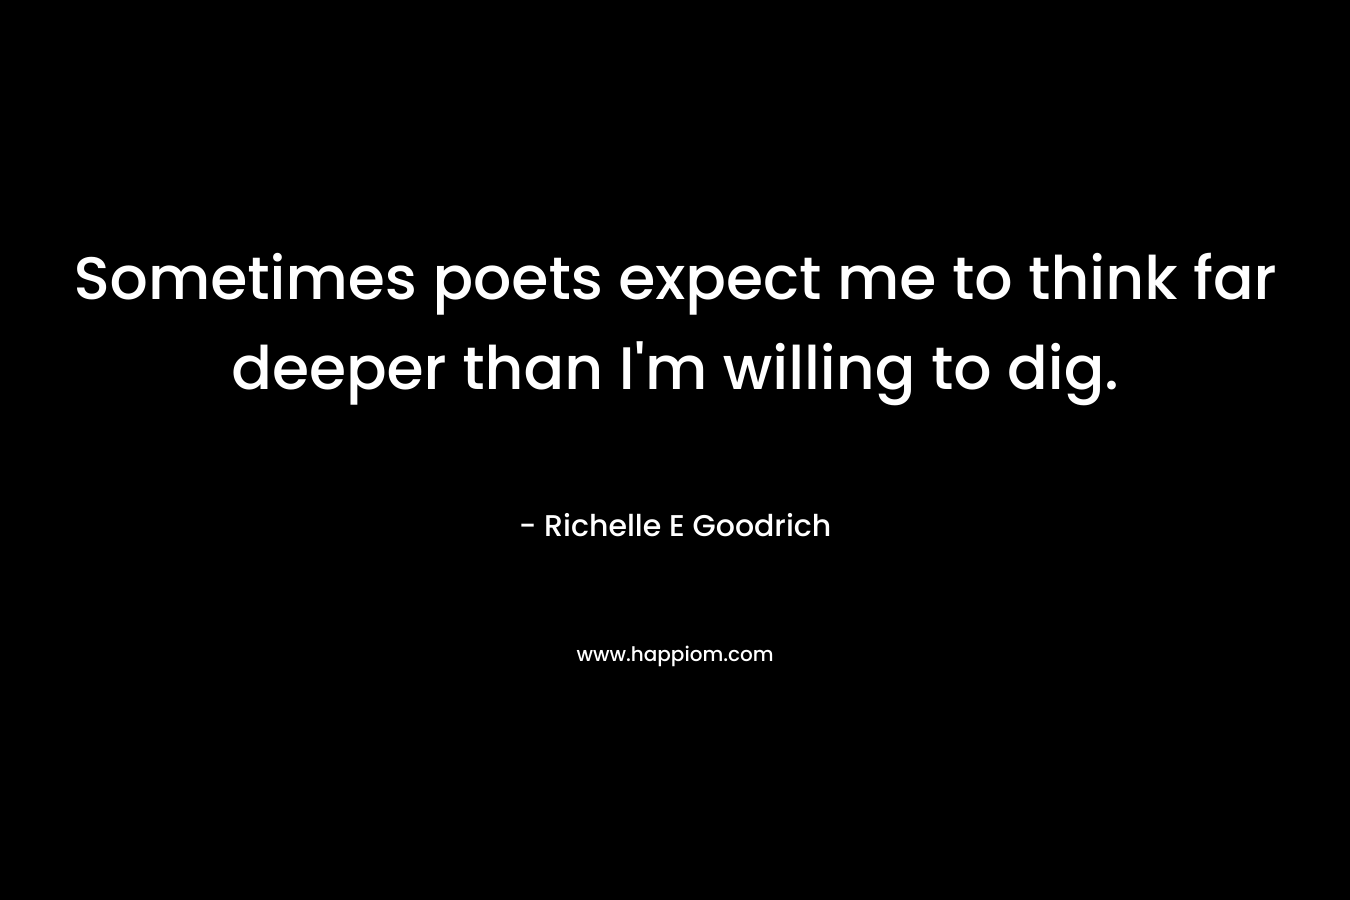 Sometimes poets expect me to think far deeper than I'm willing to dig.